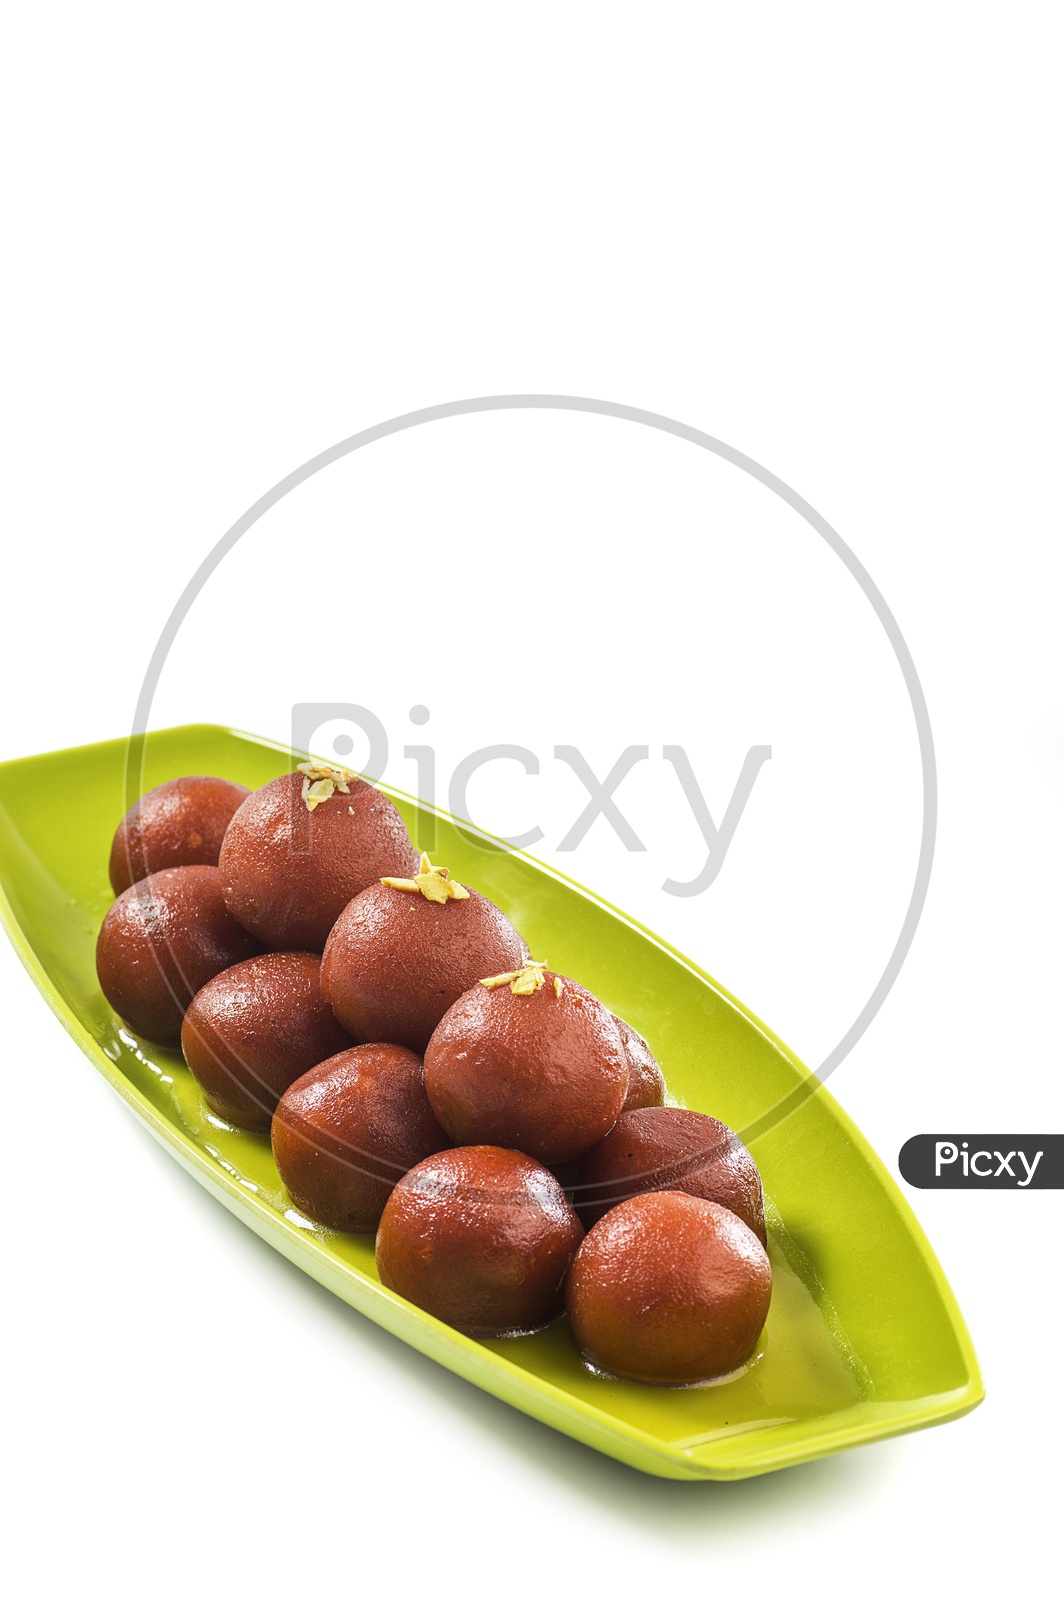 Indian Dessert or Sweet Dish Gulab Jamun topped with Pistachio in Plate